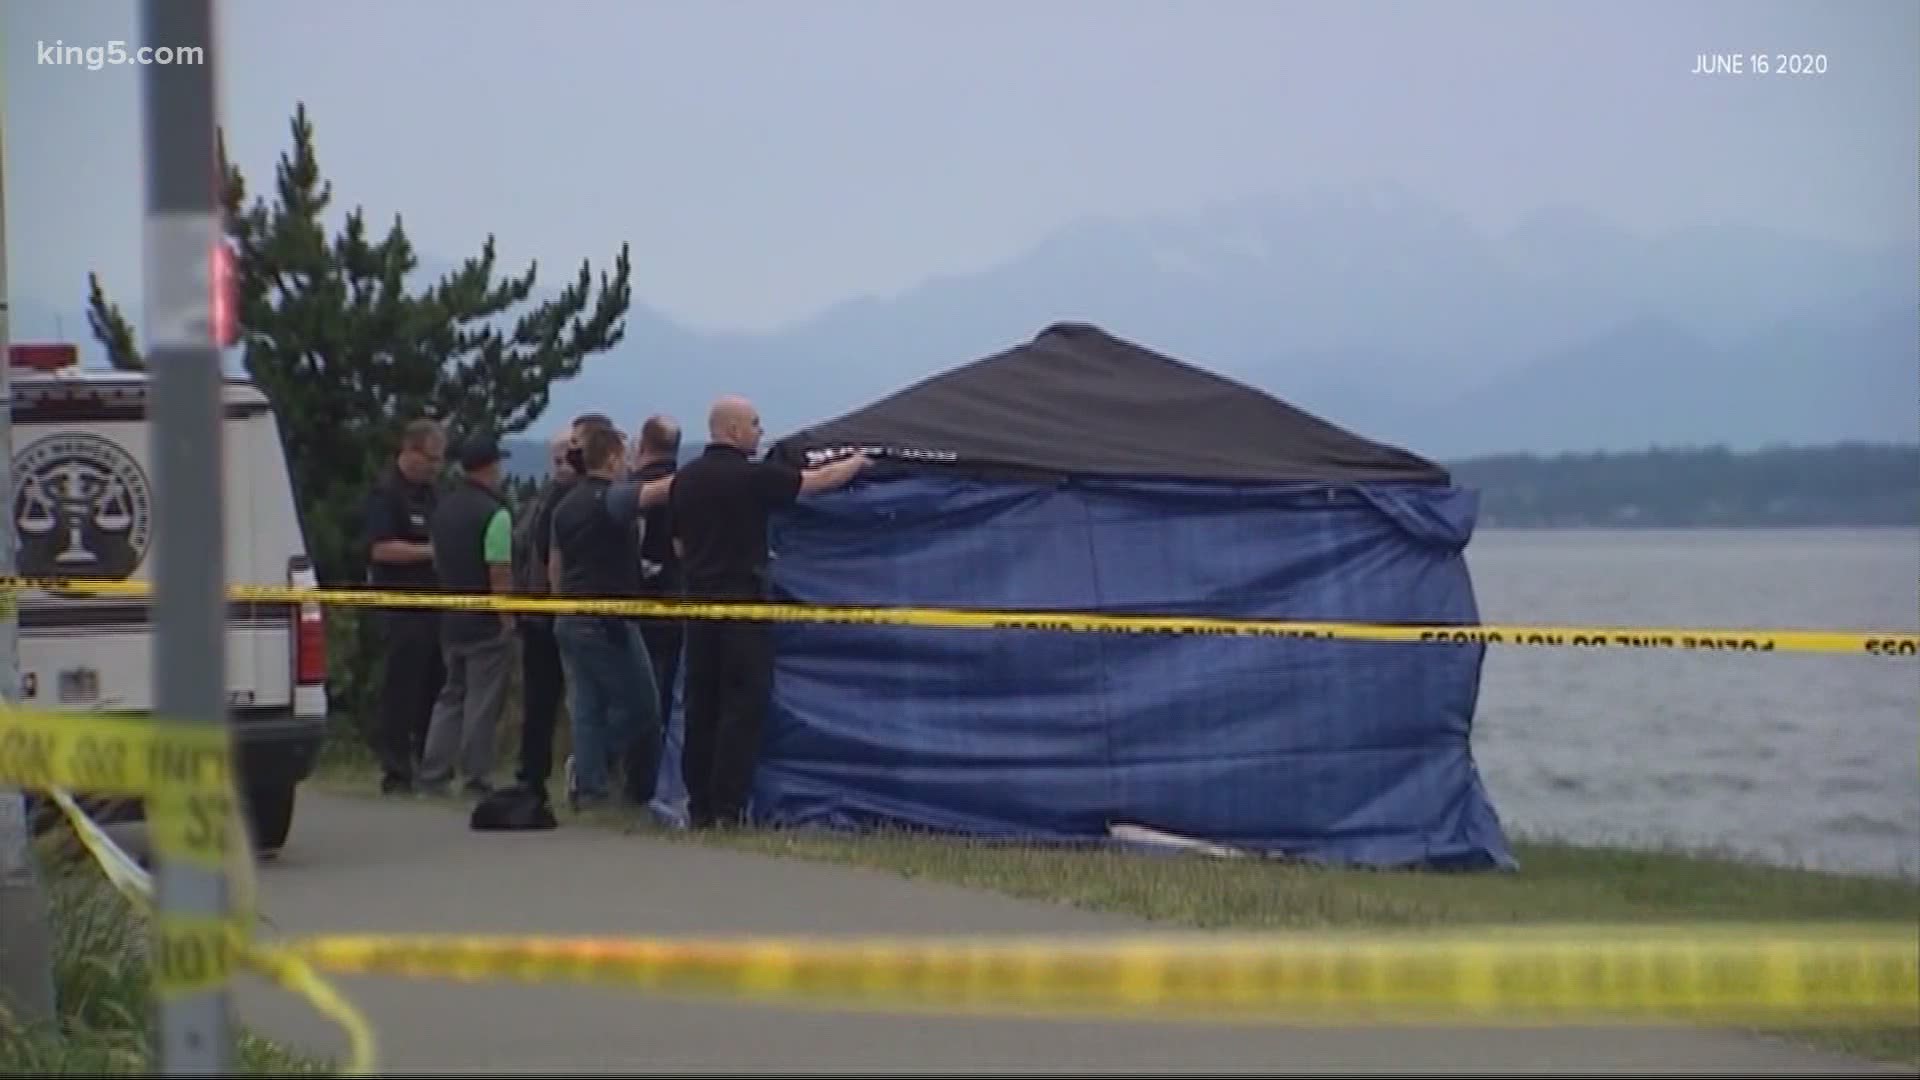 Michael Dudley, 62, was arrested in the deaths of Jessica Lewis and Austin Wenner, whose bodies were found in suitcases on a West Seattle beach in June.